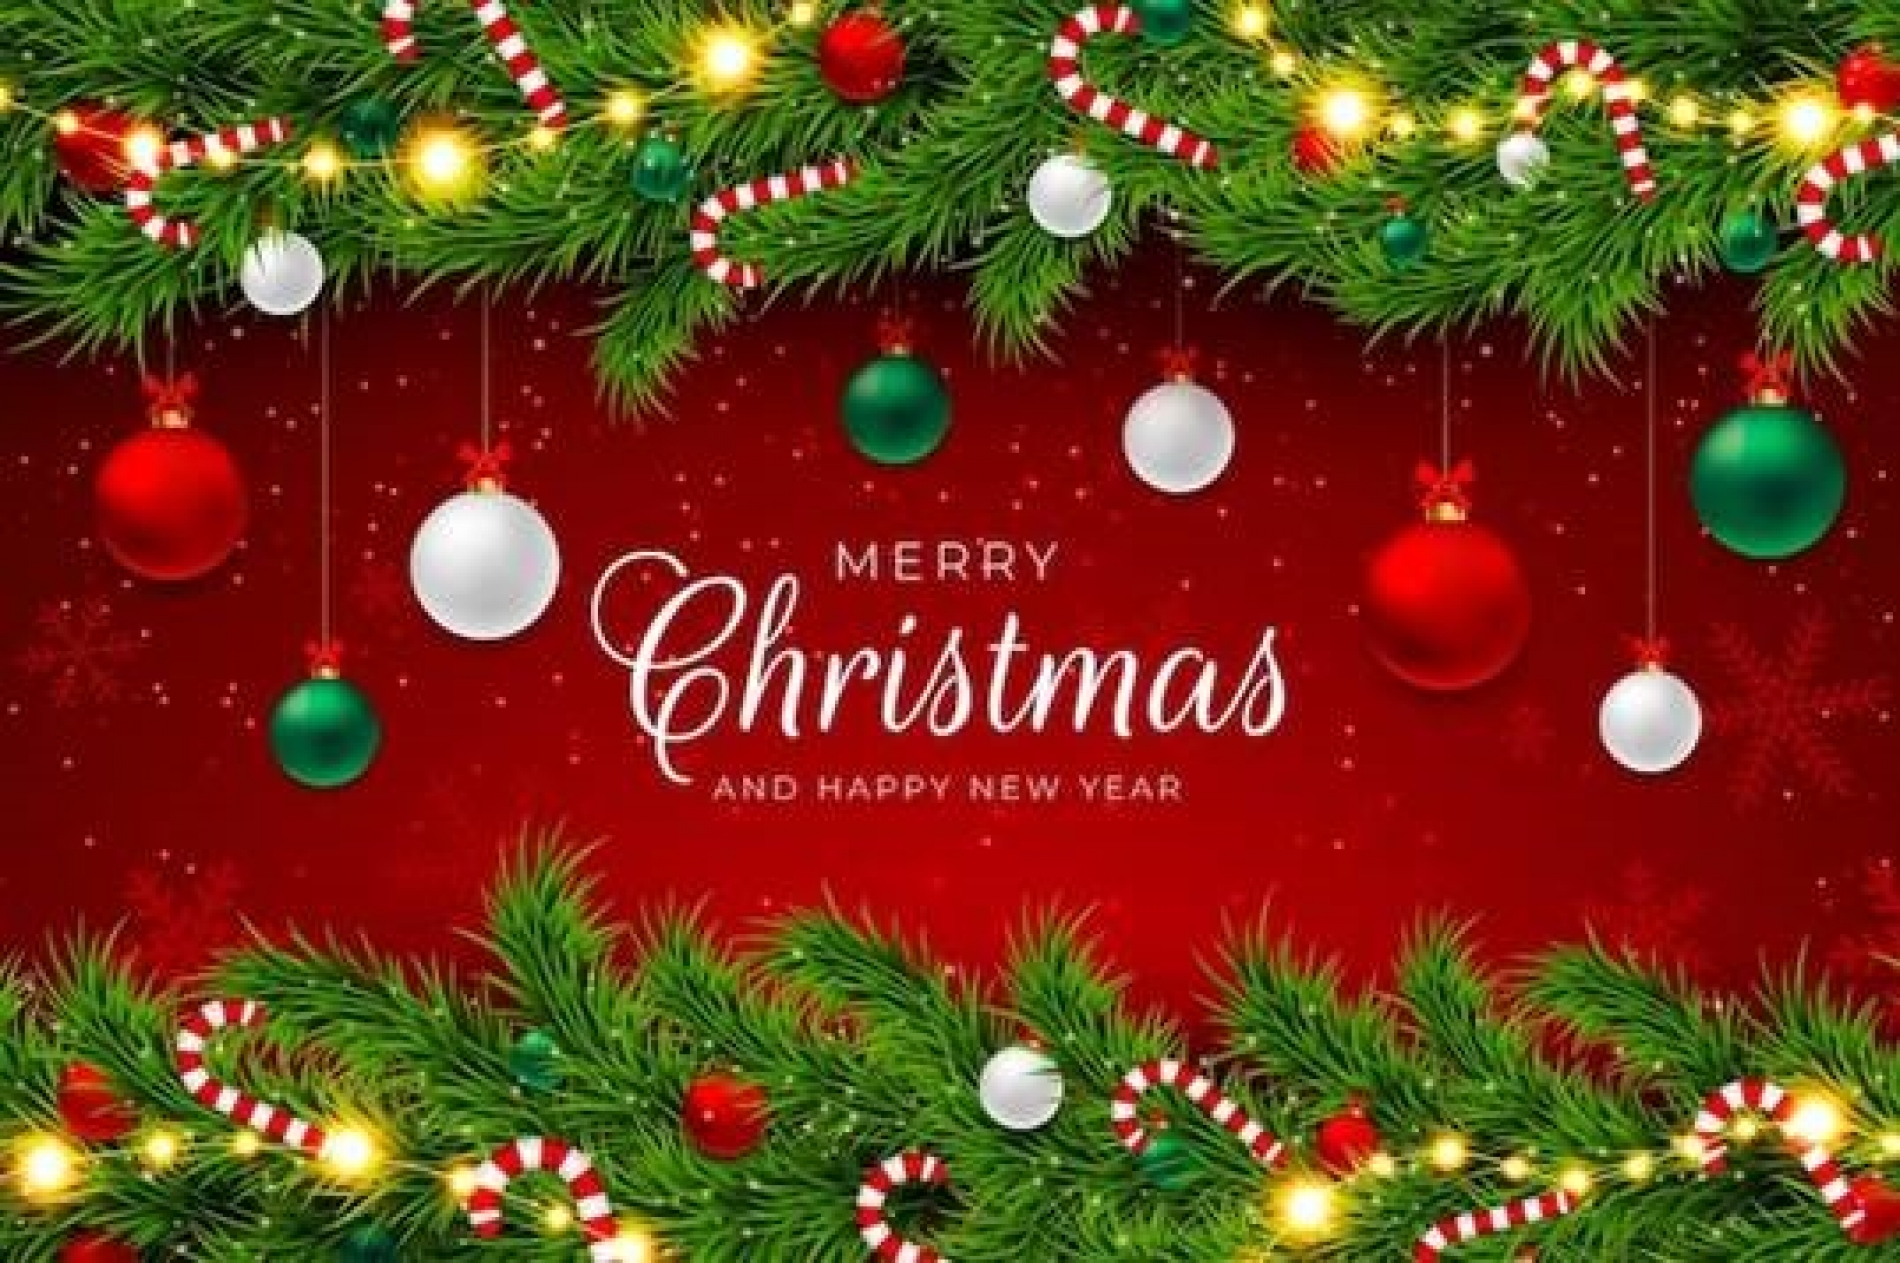 Christmas Wishes and Office Closure